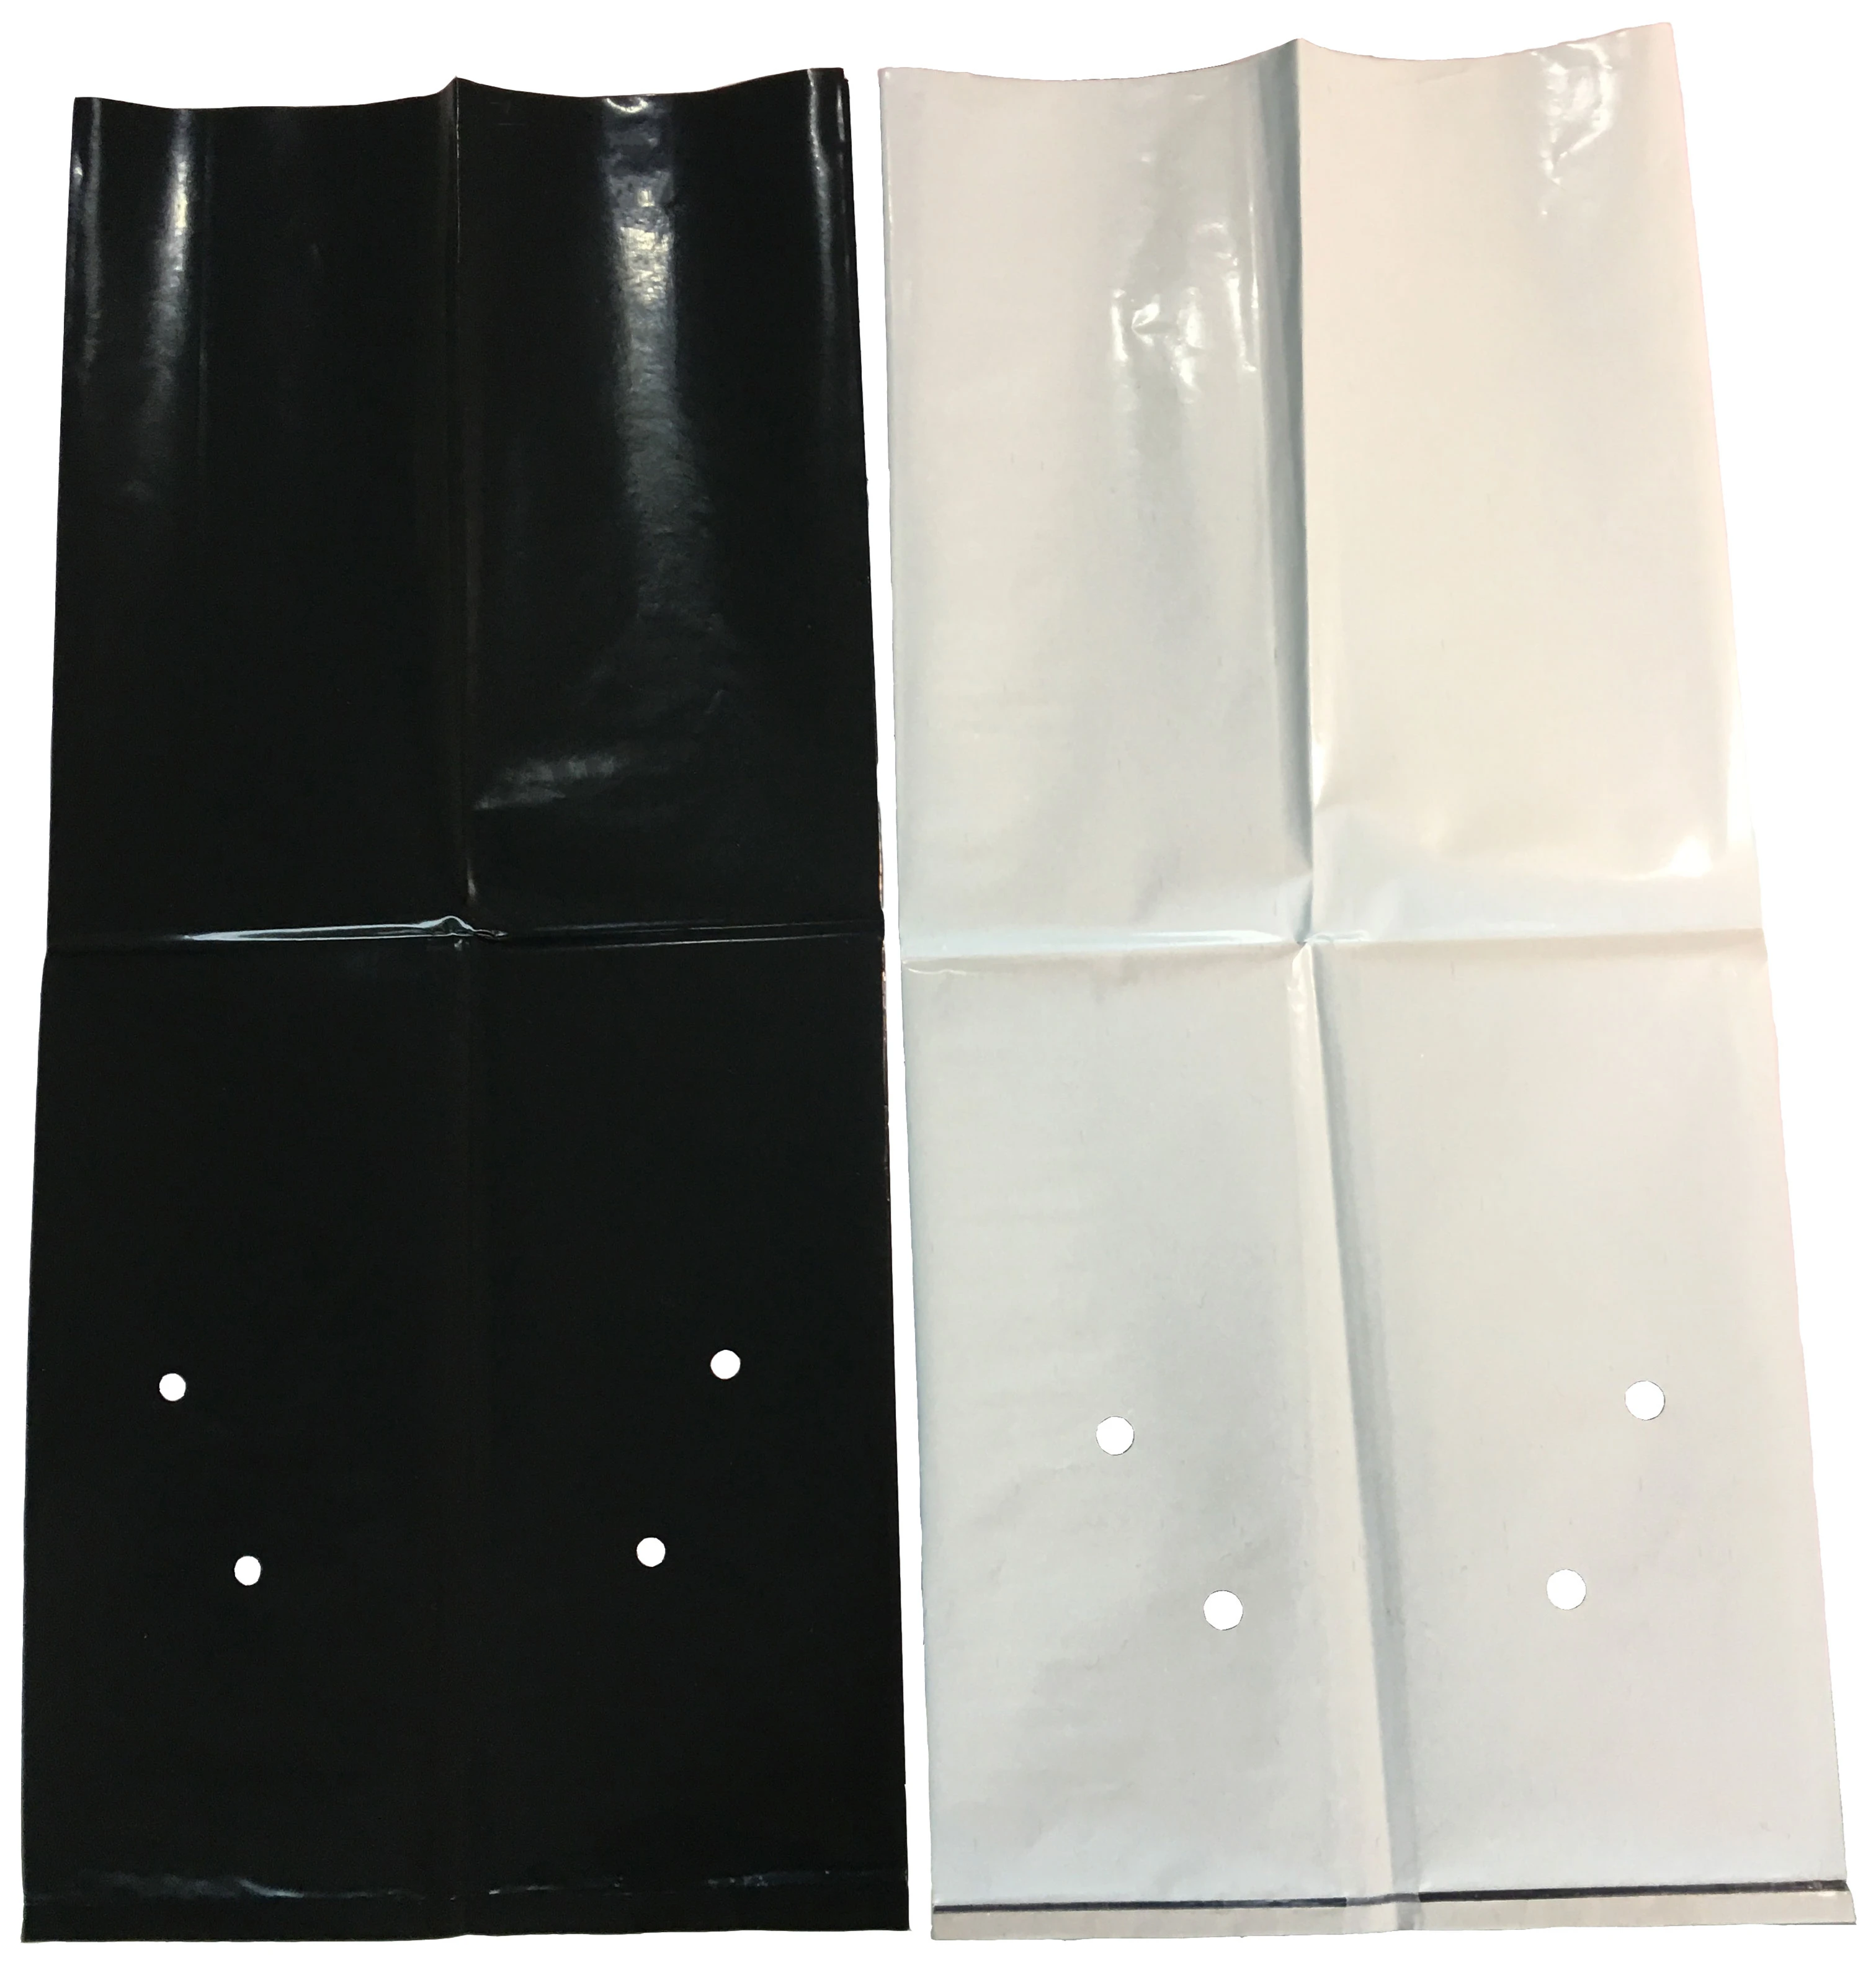 UV resistant White and Black Poly Bags for fruit tree seedlings or vegetable growing